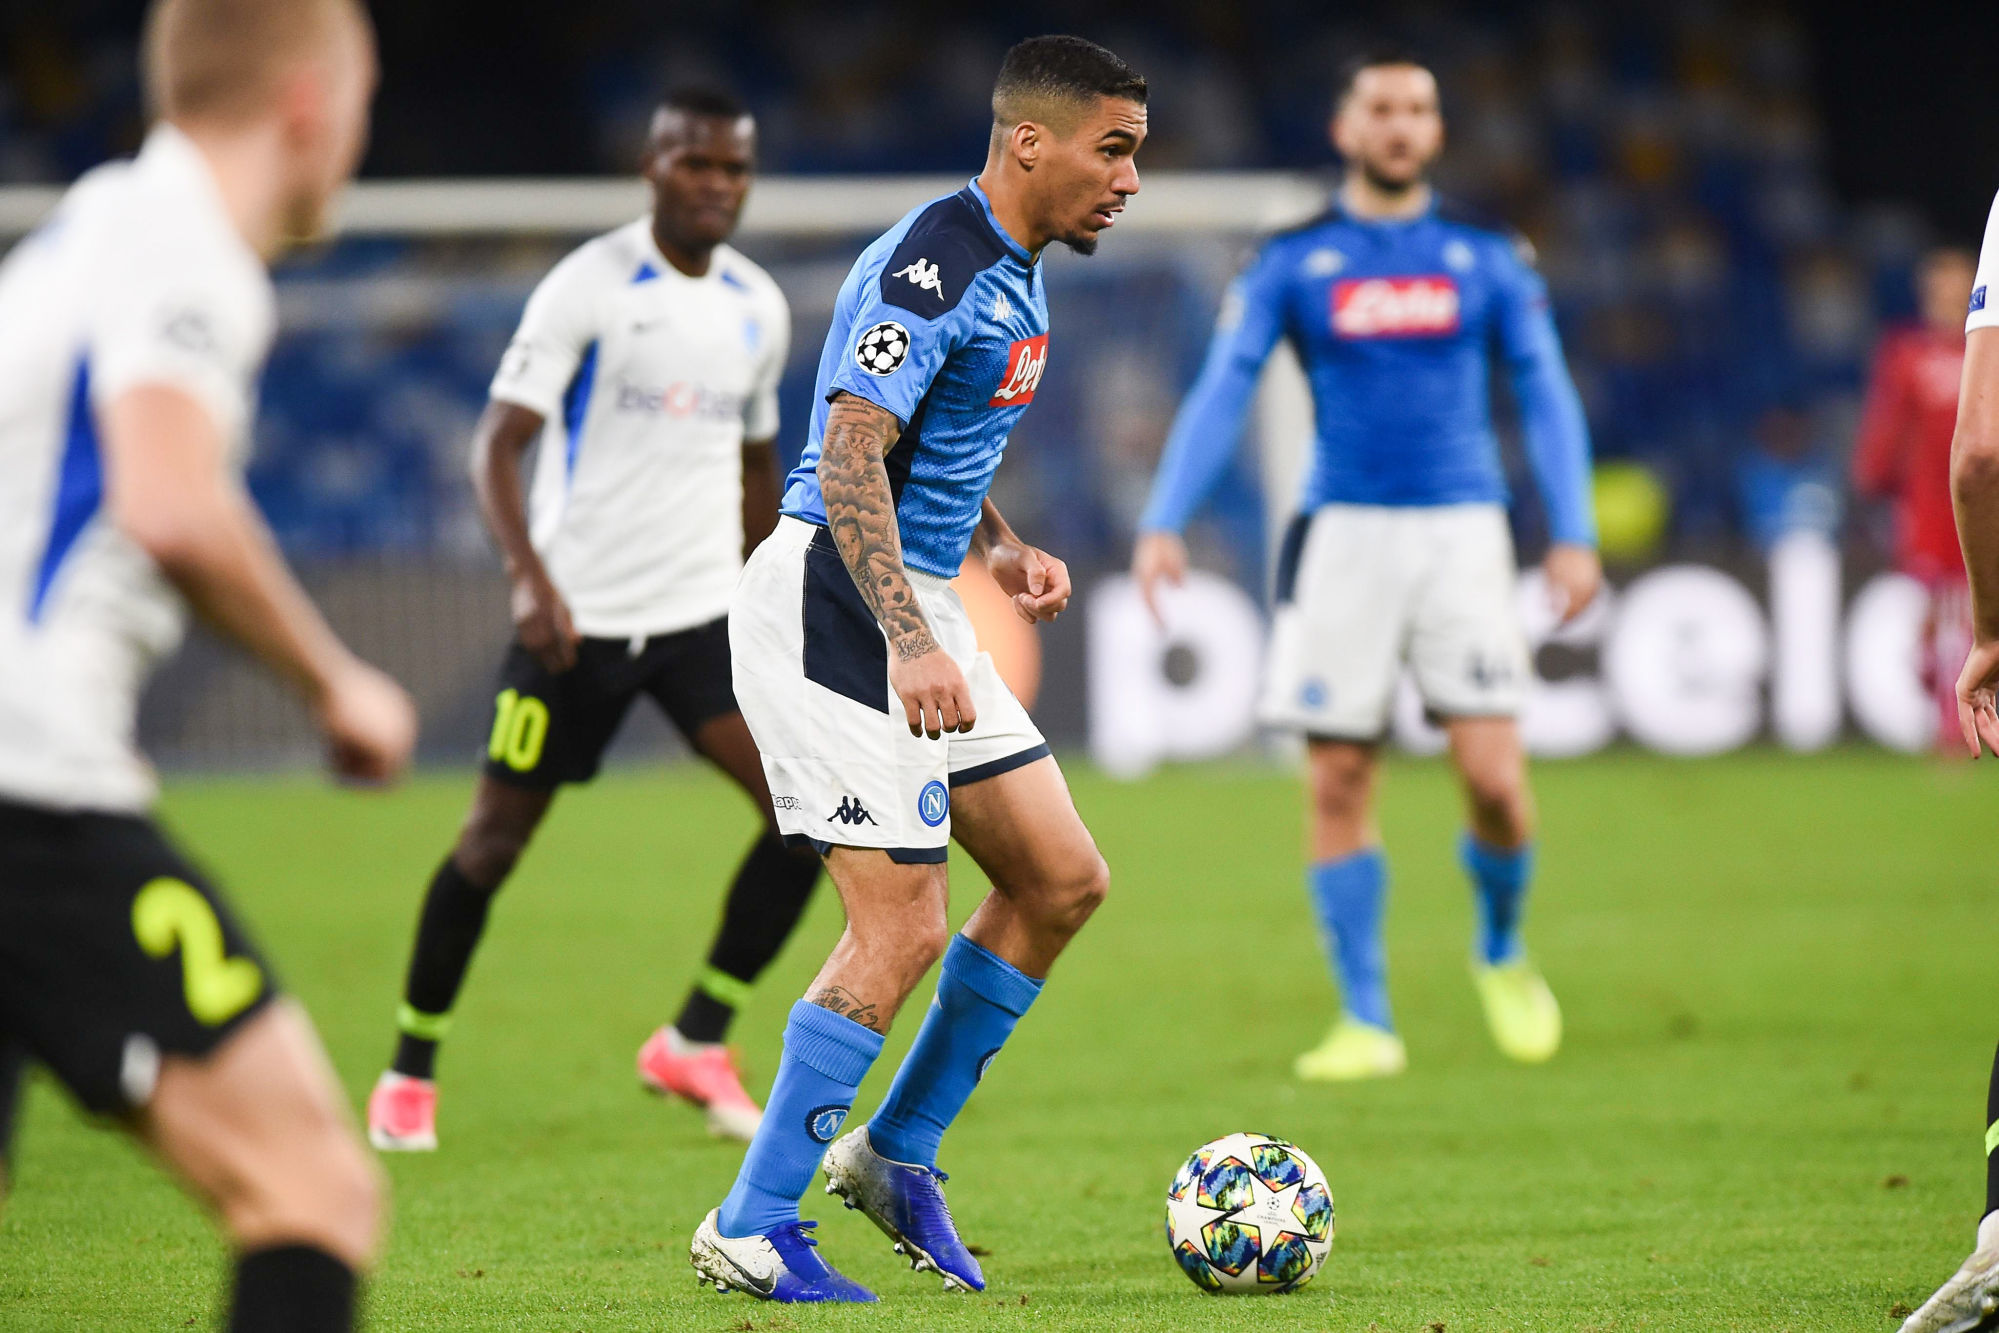 Allan of SSC Napoli during the UEFA Champions League match between SSC Napoli and KRC Genk at Stadio San Paolo Naples Italy on 10 December 2019.
PILKA NOZNA SEZON 2019/2020 LIGA MISTRZOW
FOT. SPORTPHOTO24/NEWSPIX.PL
ENGLAND OUT!
---
Newspix.pl 

Photo by Icon Sport - Allan LOUREIRO - Stade San Paolo - Naples (Italie)